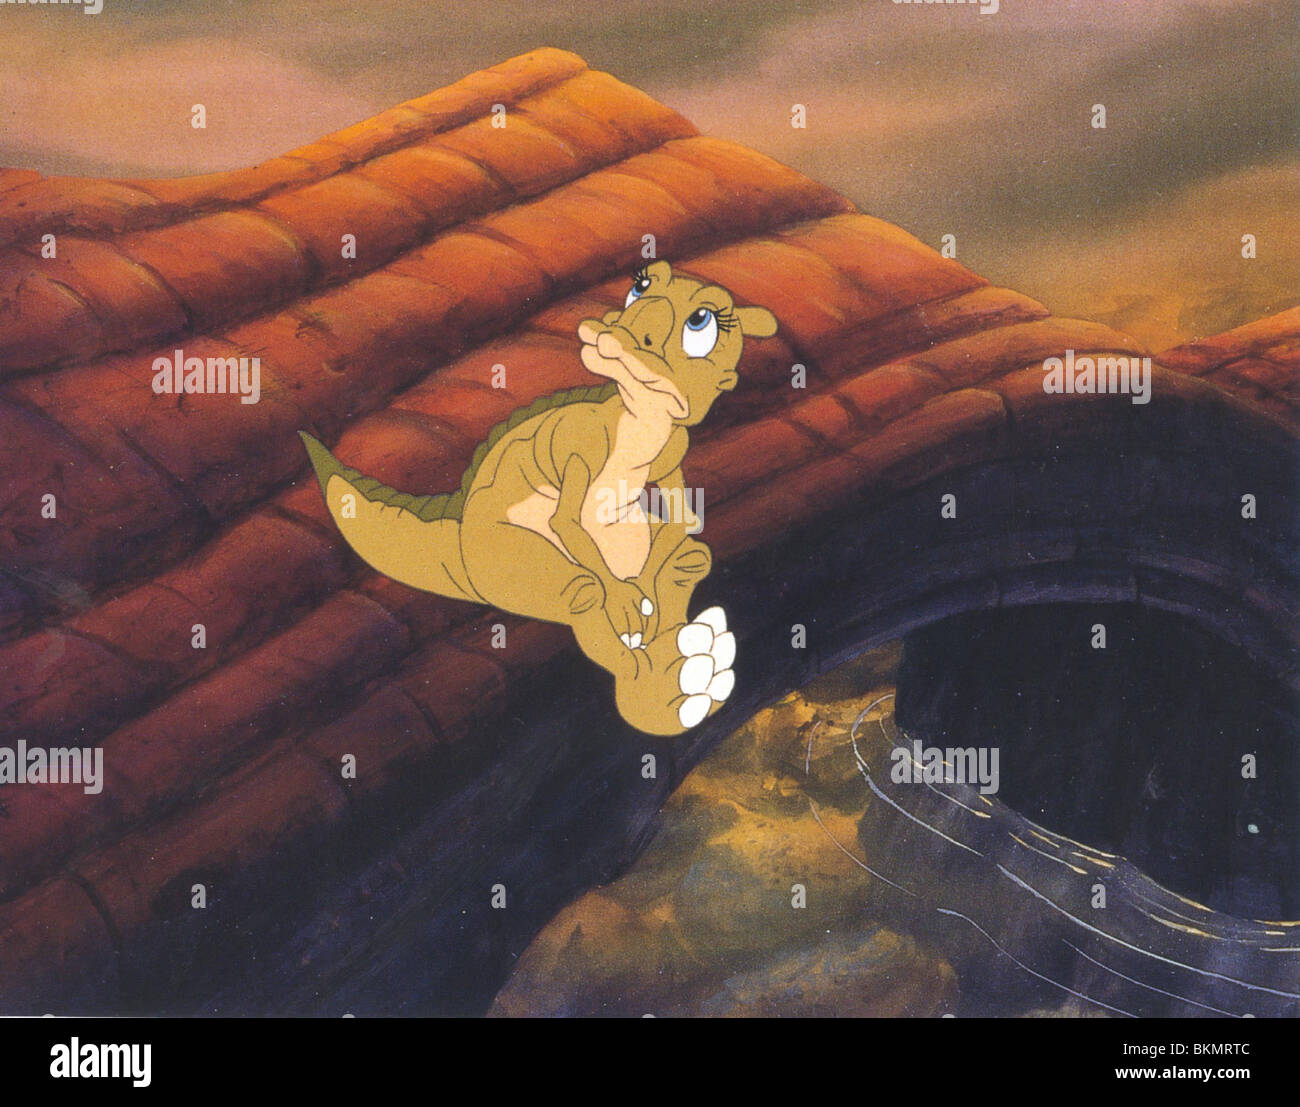 THE LAND BEFORE TIME LBT 003FOH Stock Photo Alamy